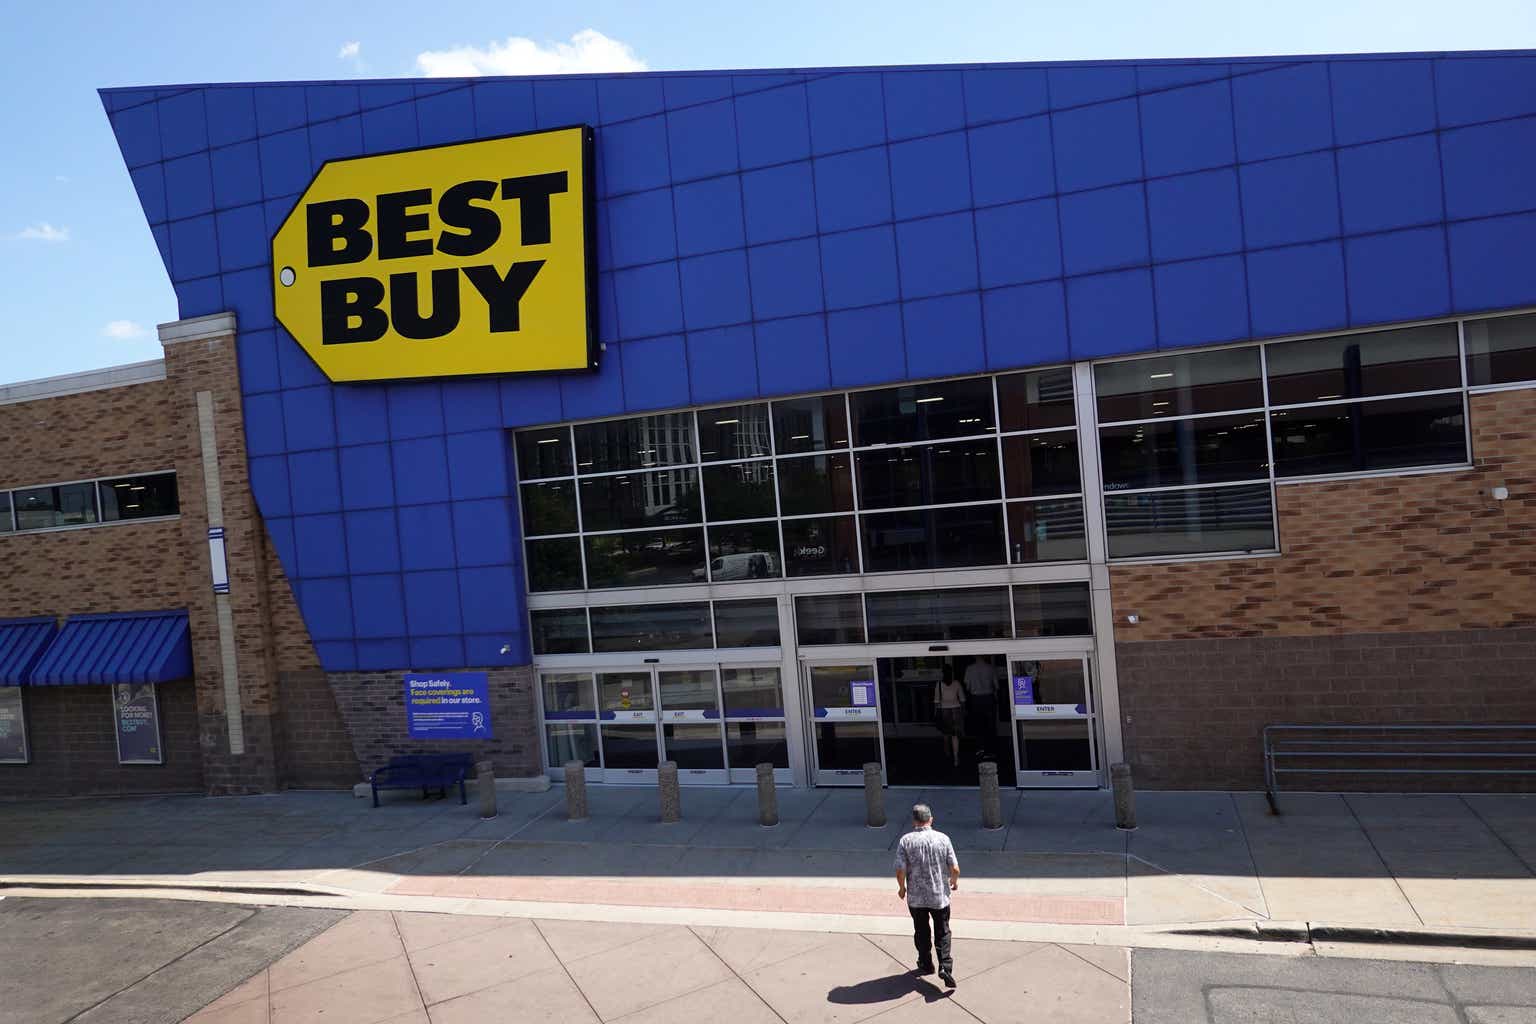 Best Buy It Has Been So Bad That It's Starting To Look Good (NYSEBBY